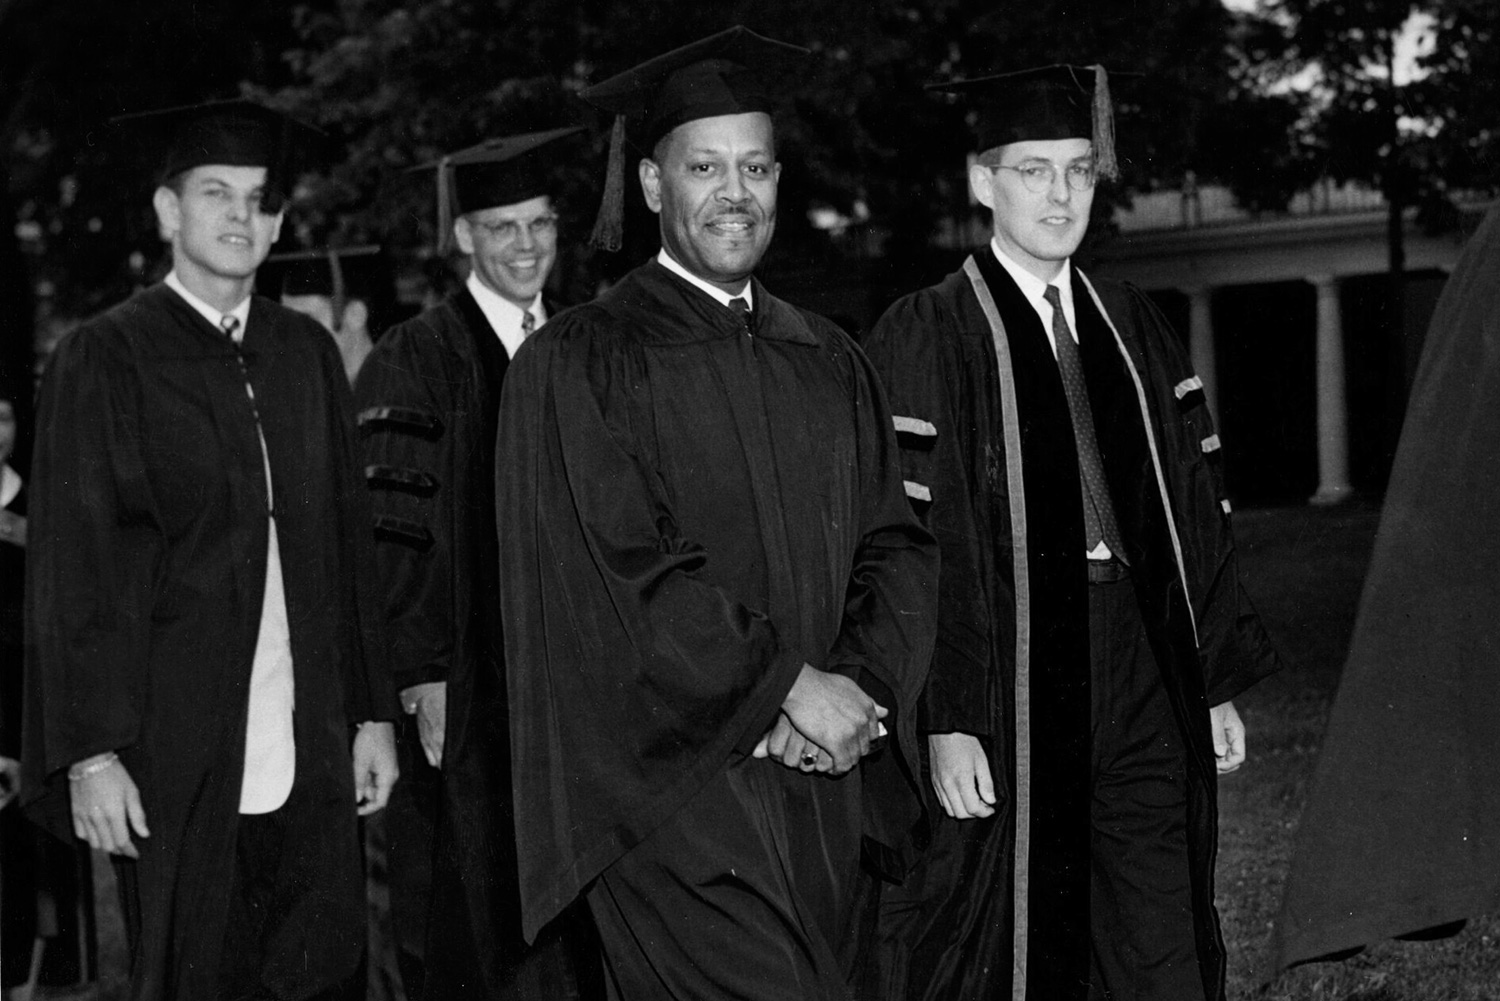 Walter F. Ridley walking the lawn during his graduation ceremony. Black and white image